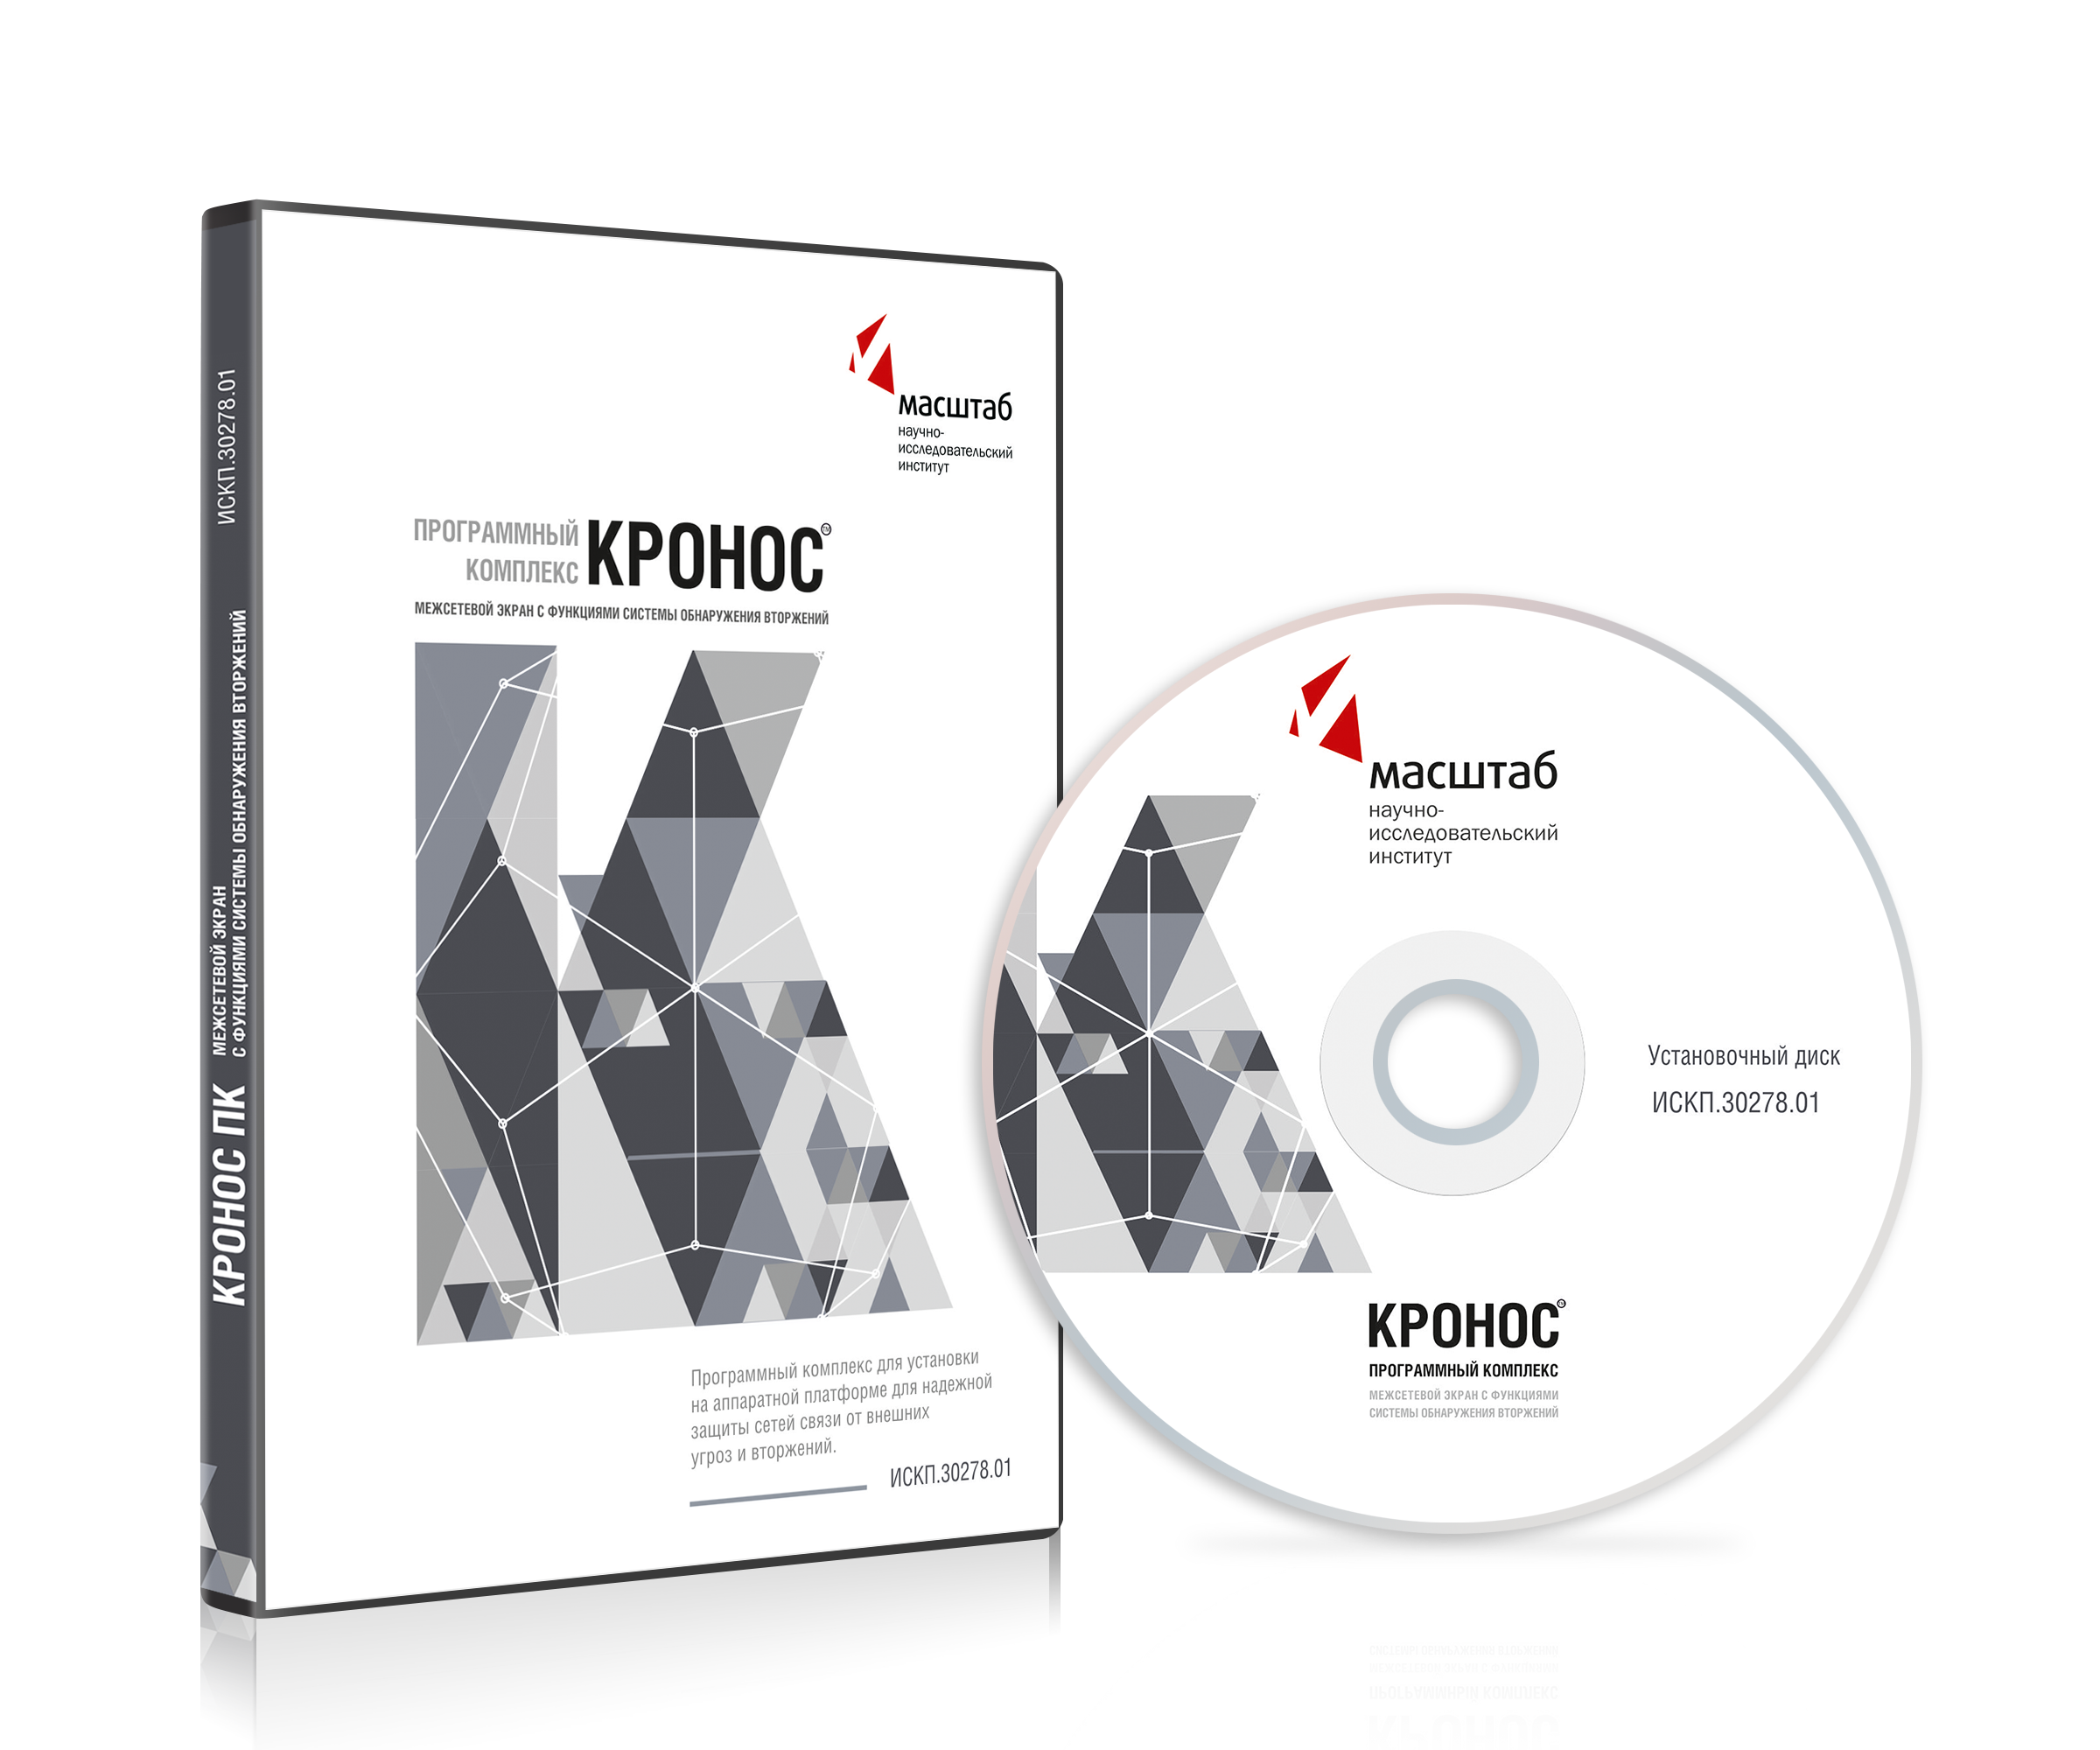 KRONOS software package